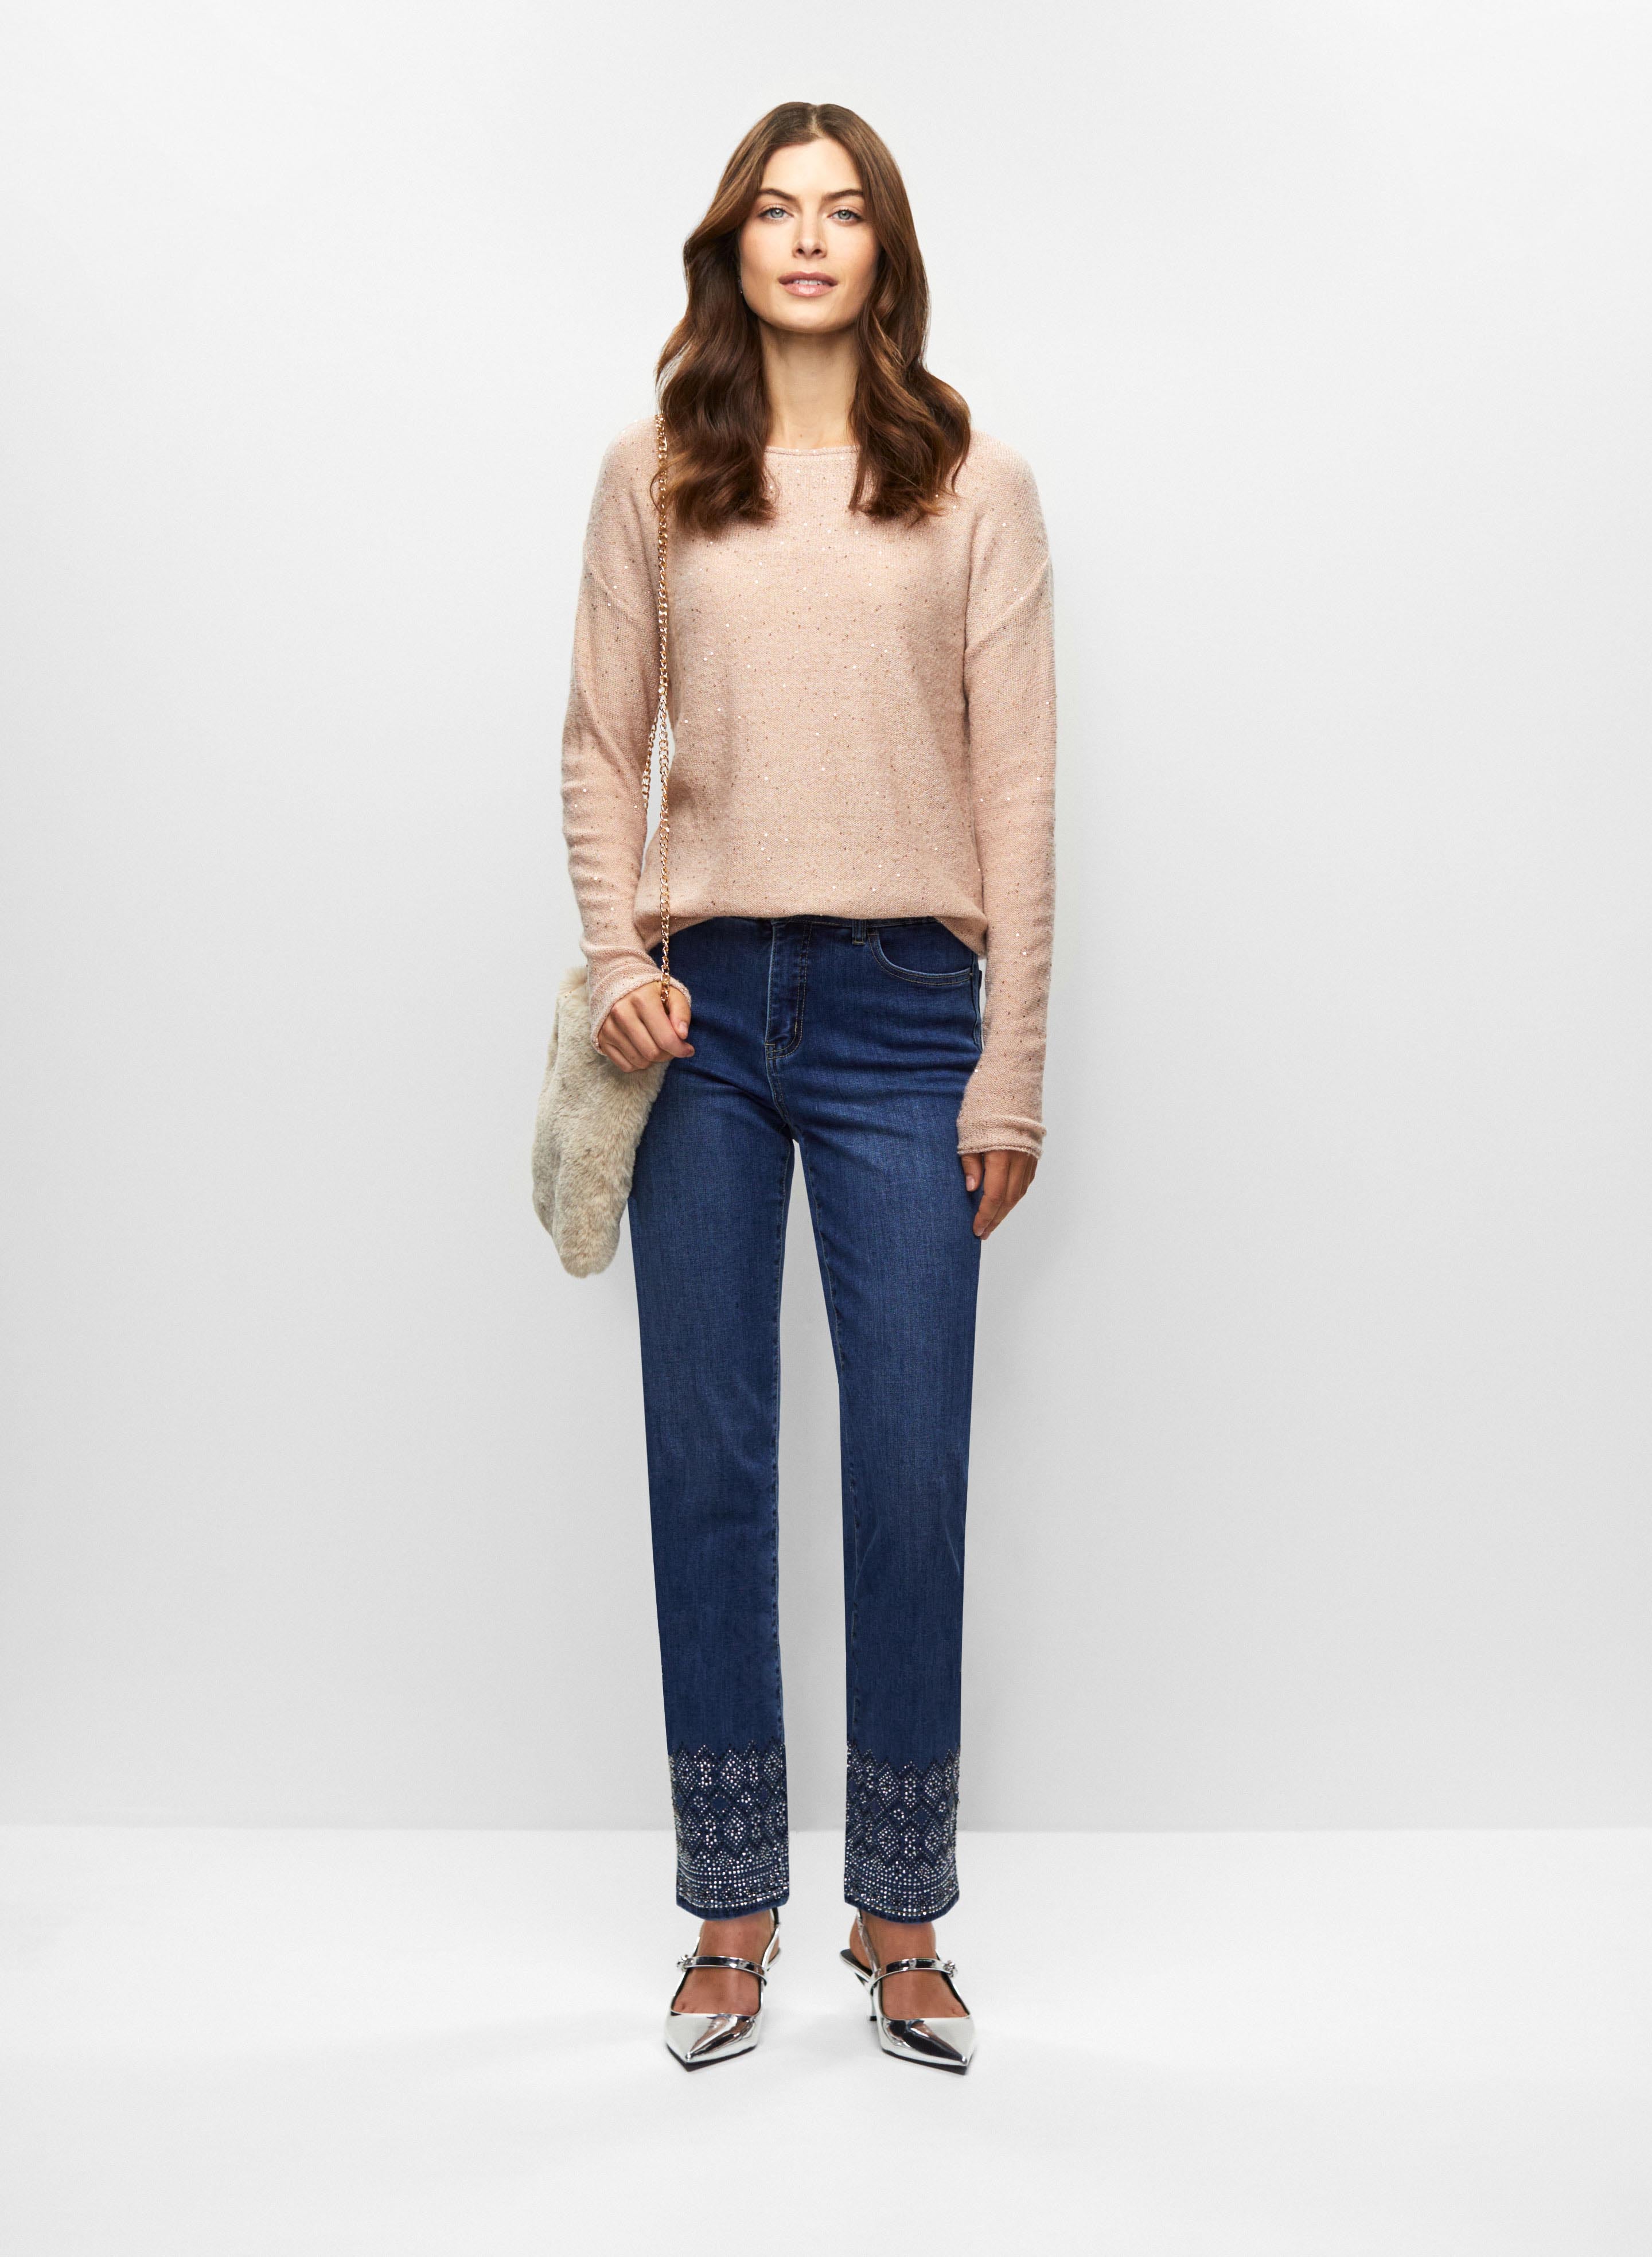 Sequin Detail Knit & Embroidered Jeans